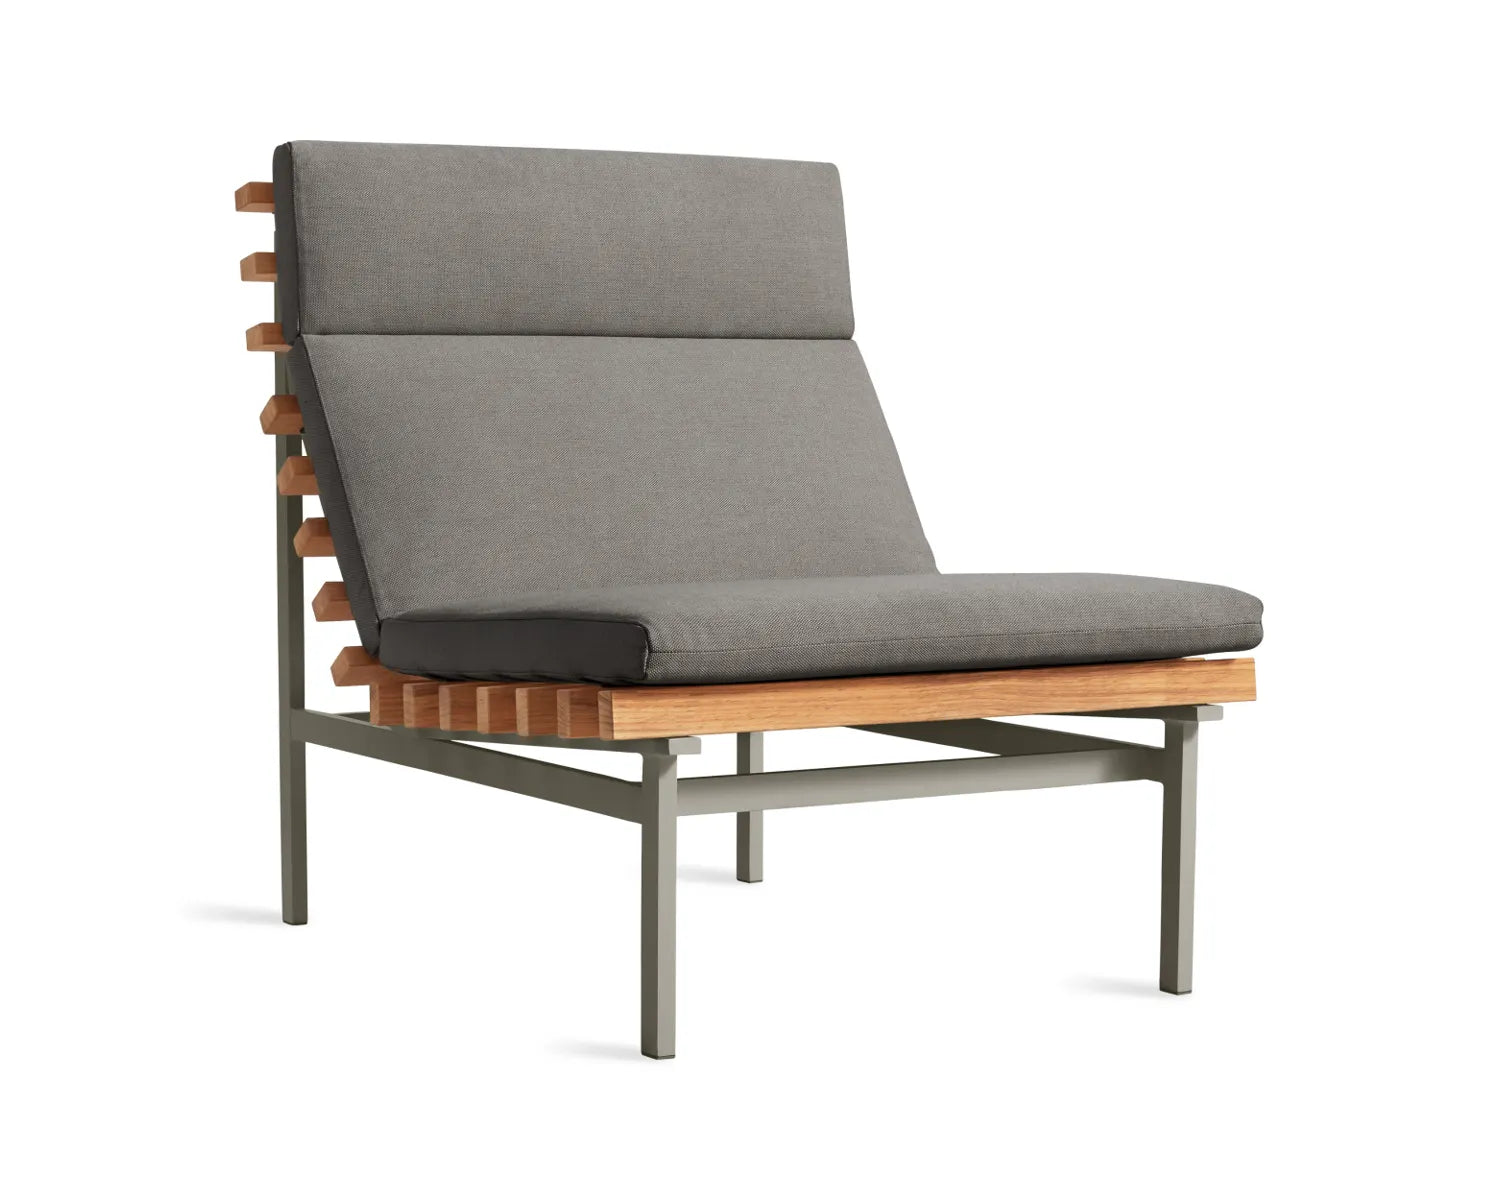 Perch Outdoor Lounge Chair [Toohey Charcoal] Floor Model Only